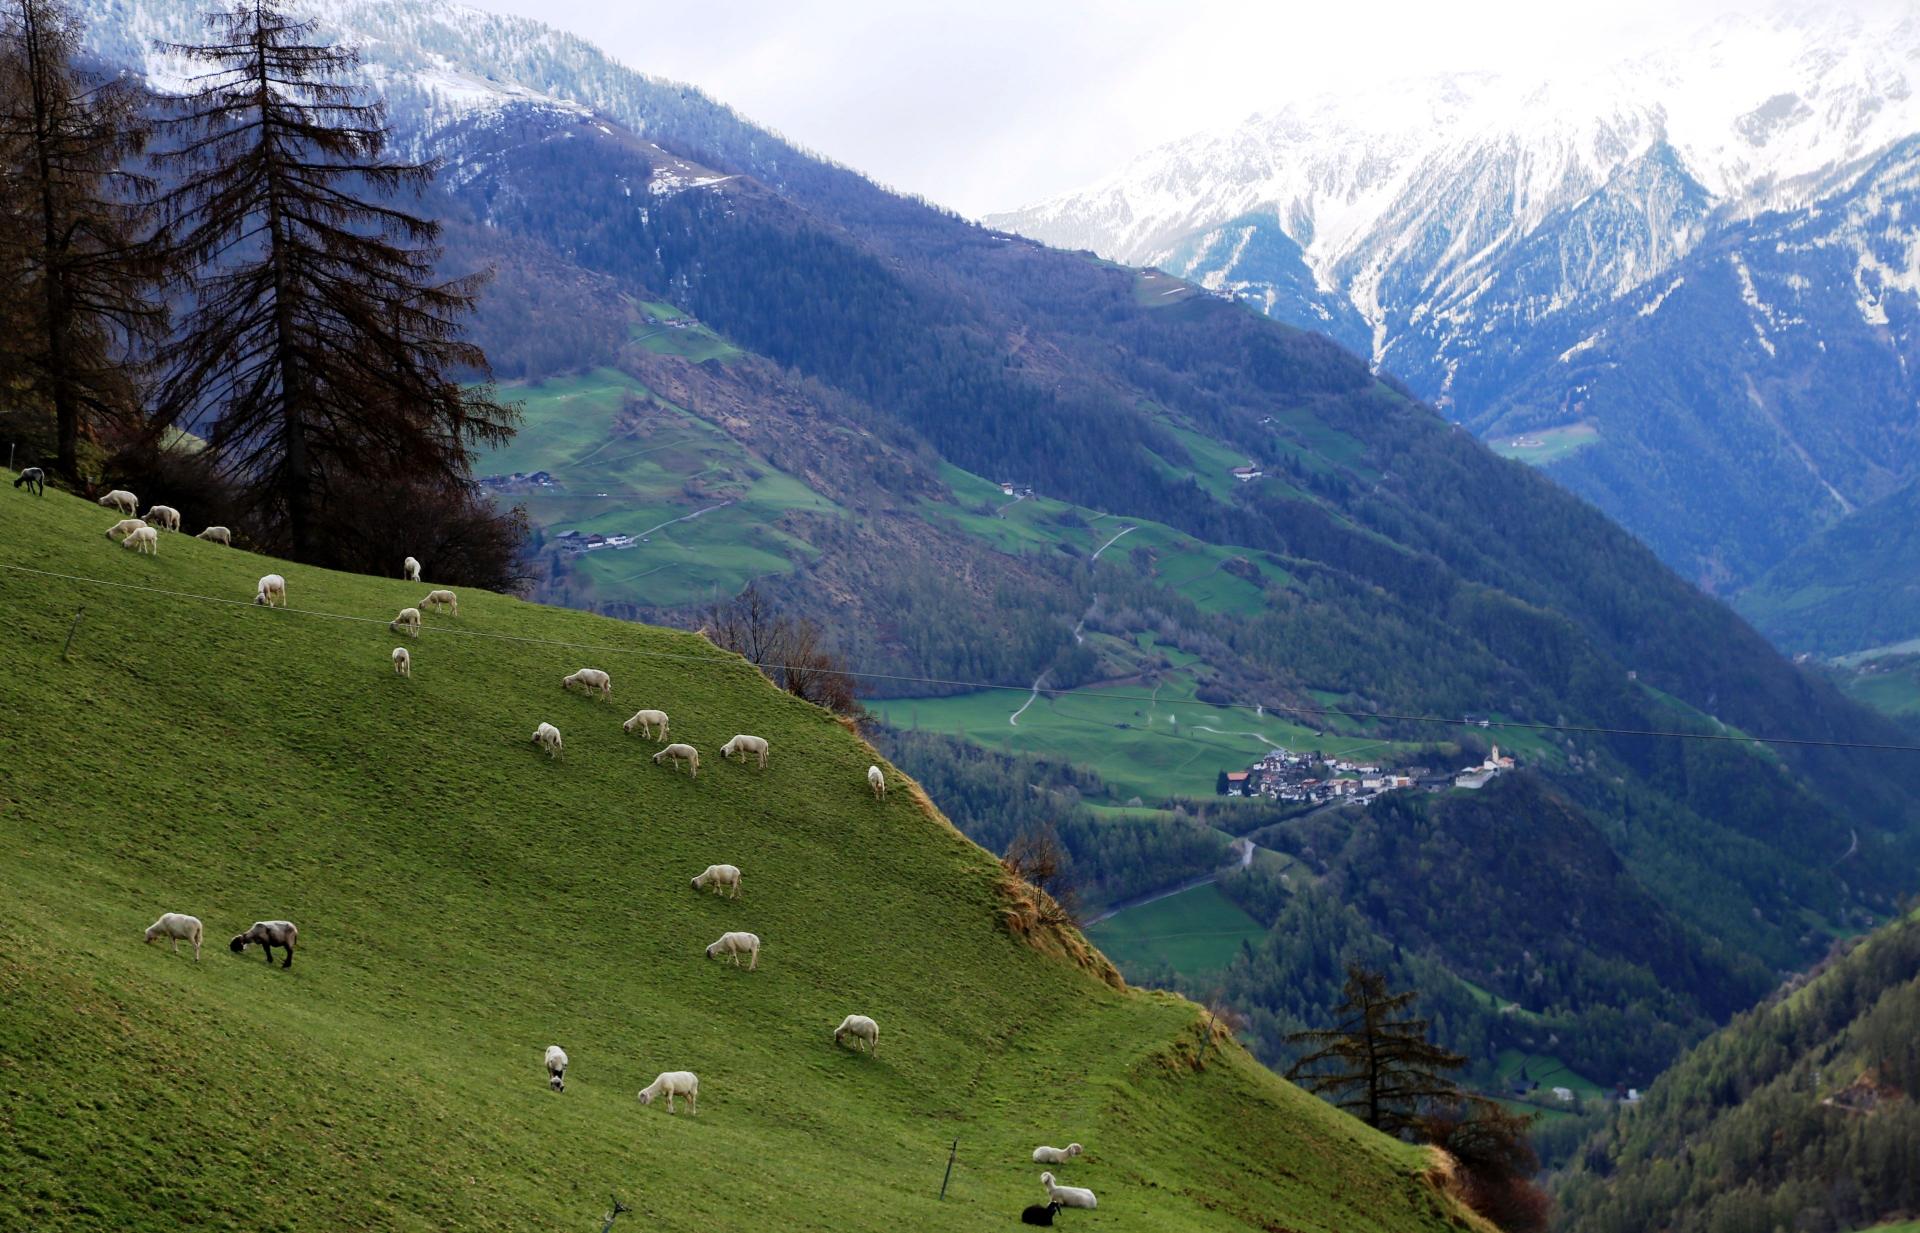 A flock of sheep grazing in an Alpine grassfield